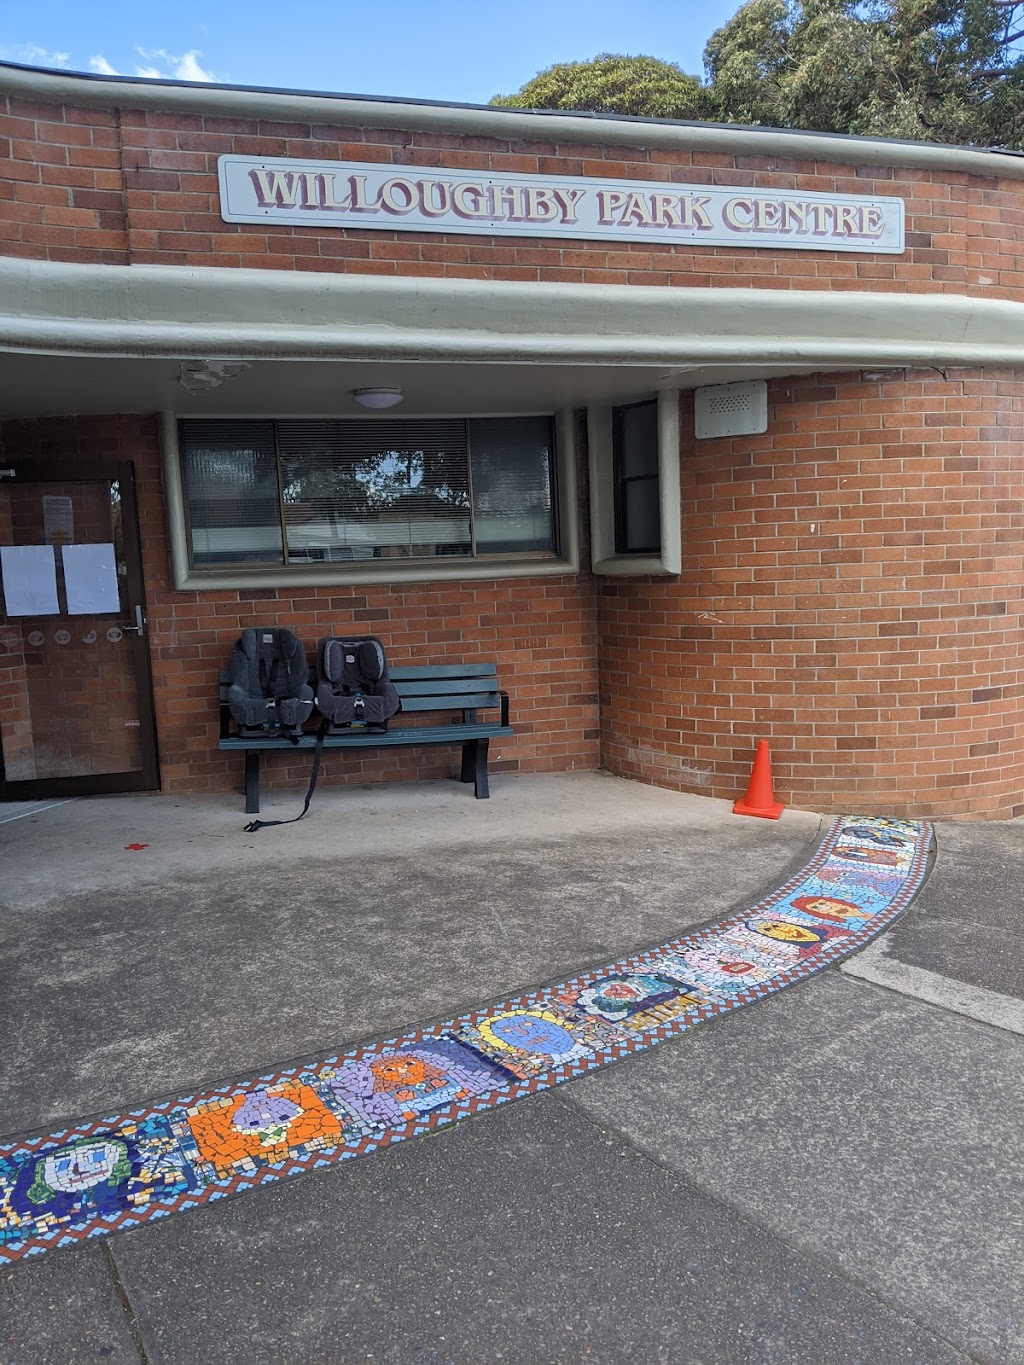 Willoughby Park Centre | McClelland St &, Warrane Rd, Willoughby NSW 2068, Australia | Phone: (02) 9967 2917